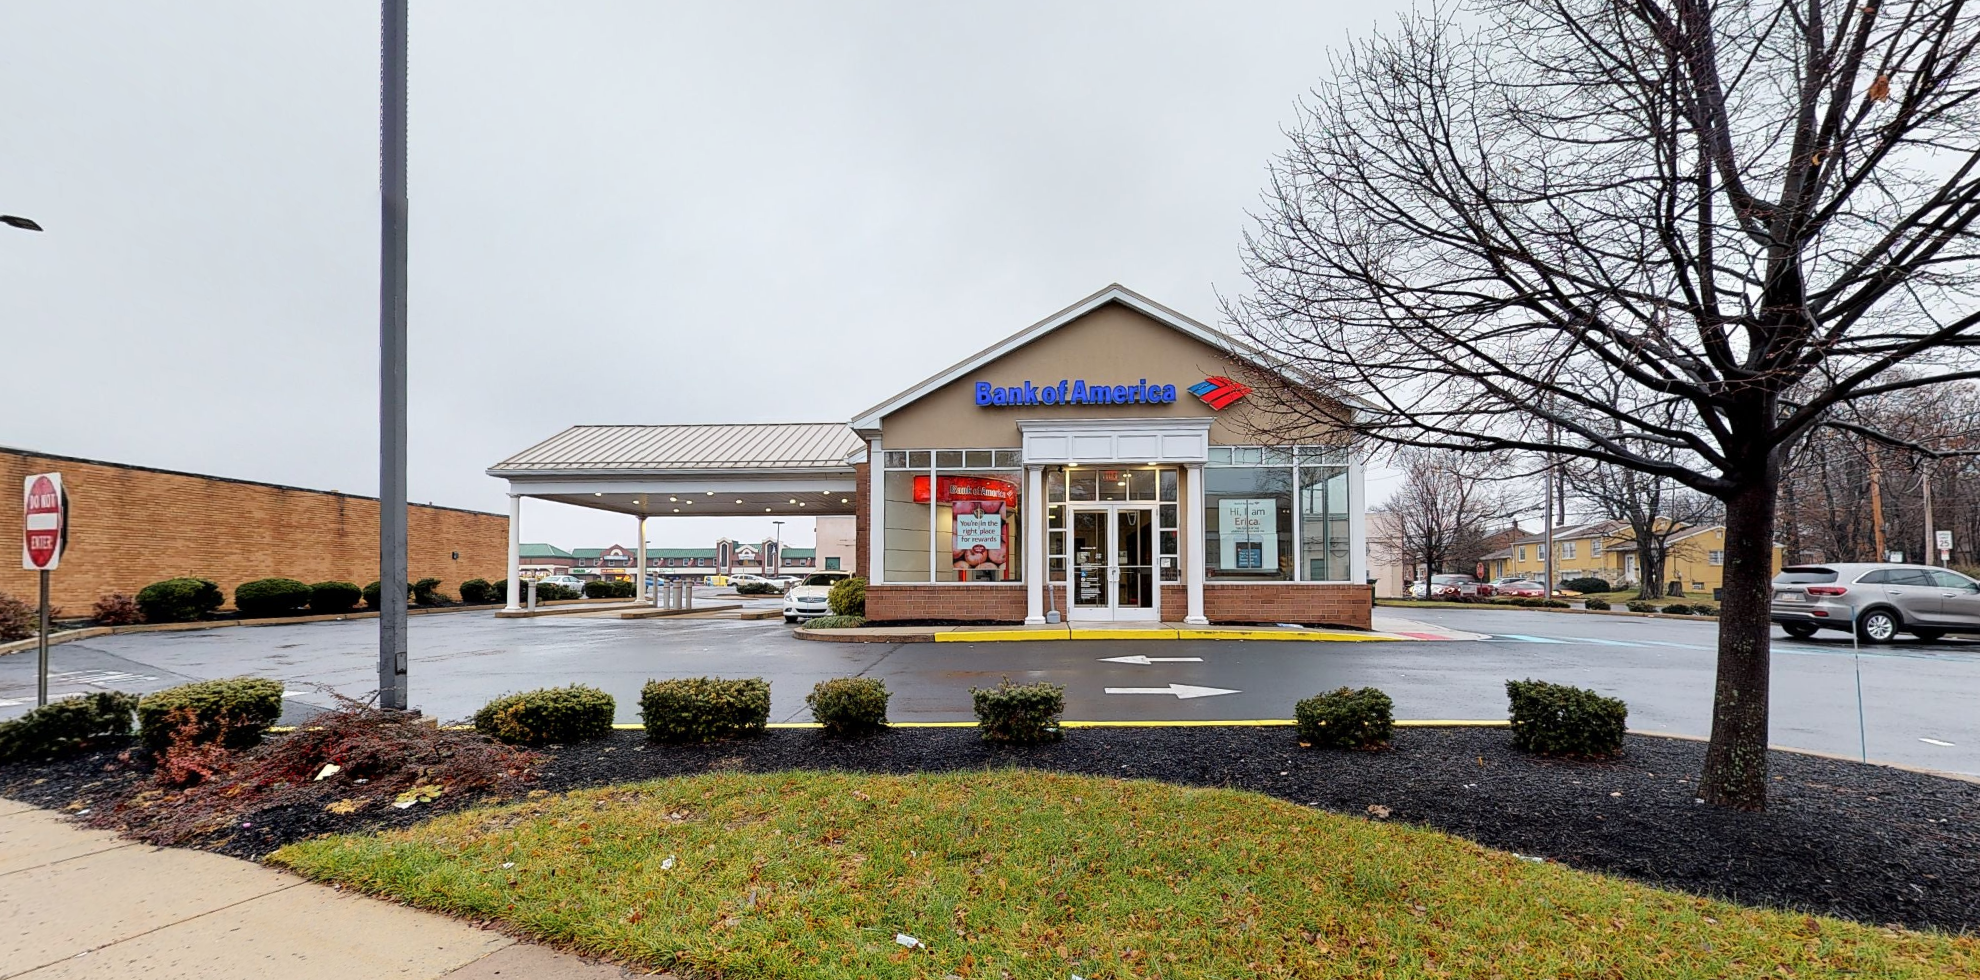 Bank of America financial center with drive-thru ATM | 2439 Welsh Rd, Philadelphia, PA 19114